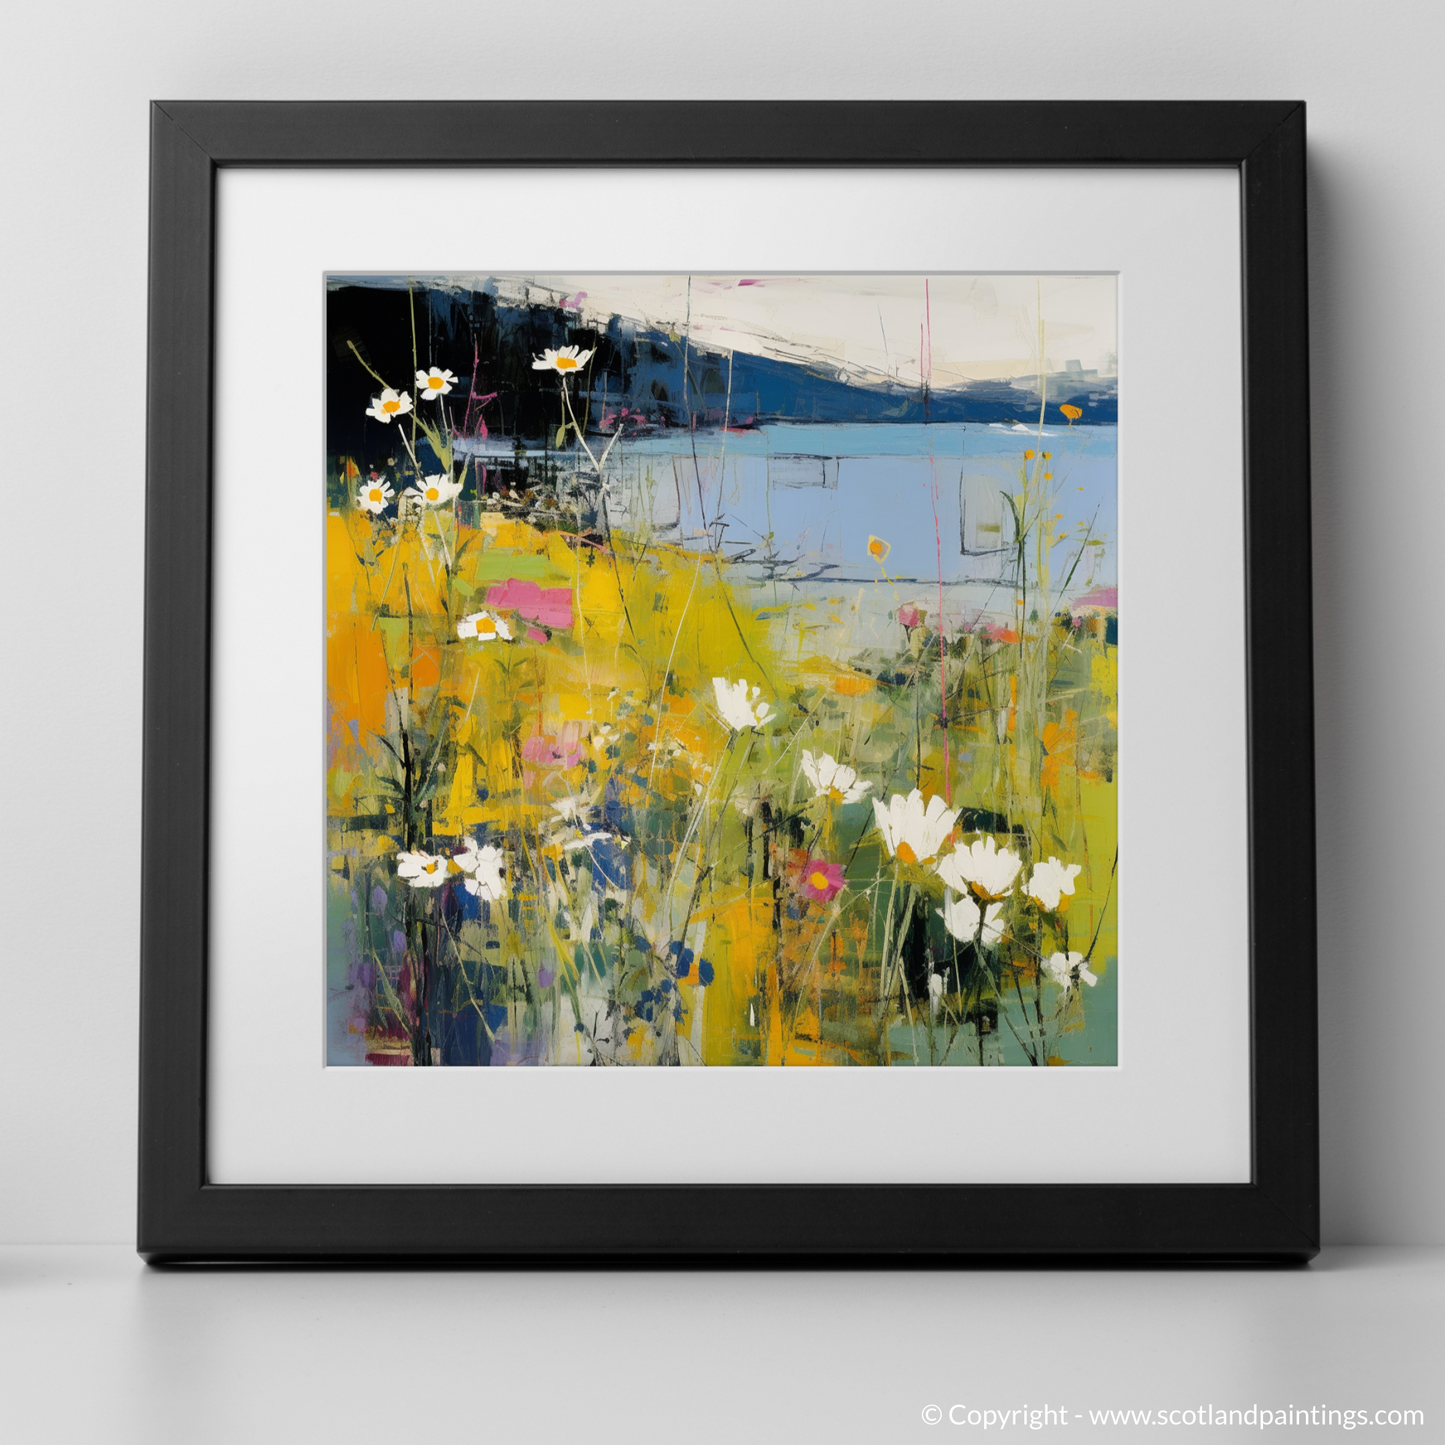 Art Print of Wildflowers by Loch Lomond with a black frame